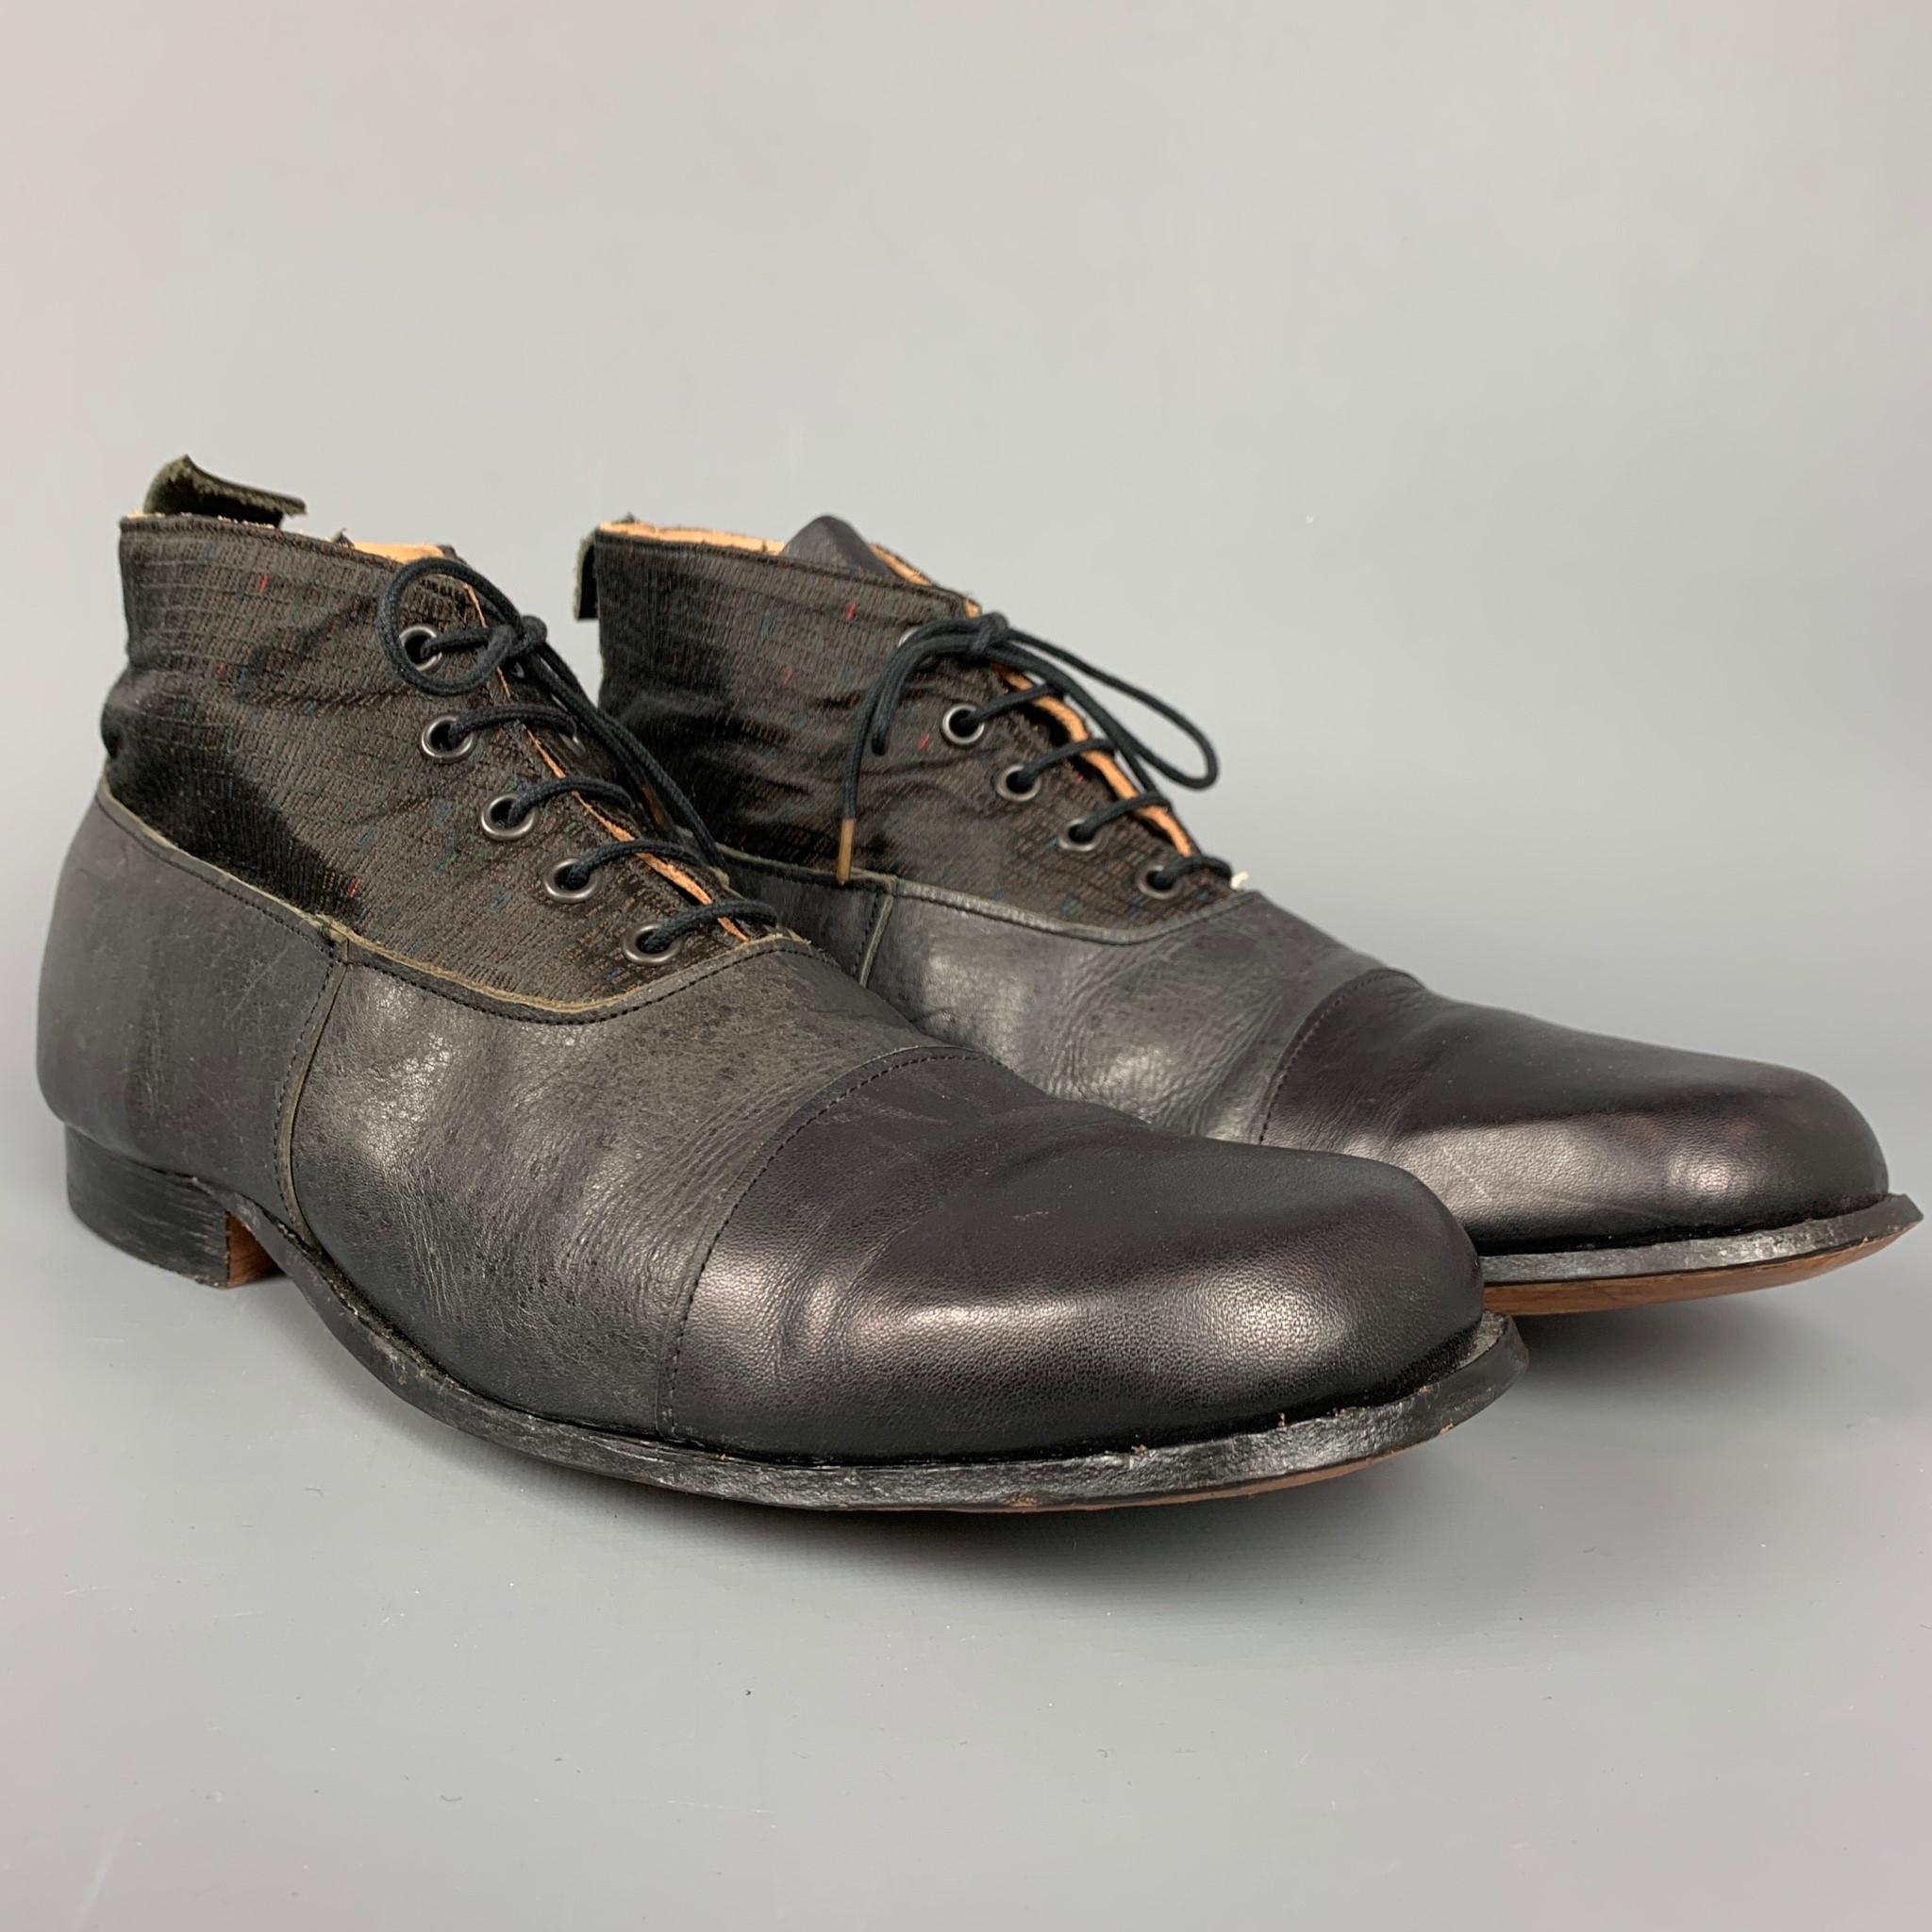 PAUL HARNDEN ankle boots comes in a black leather with a taupe silk trim design featuring a cap toe, wooden sole, and a lace up closure. 

Very Good Pre-Owned Condition.
Marked: 8
Original Retail Price: $1,395.00

Measurements:

Length: 12